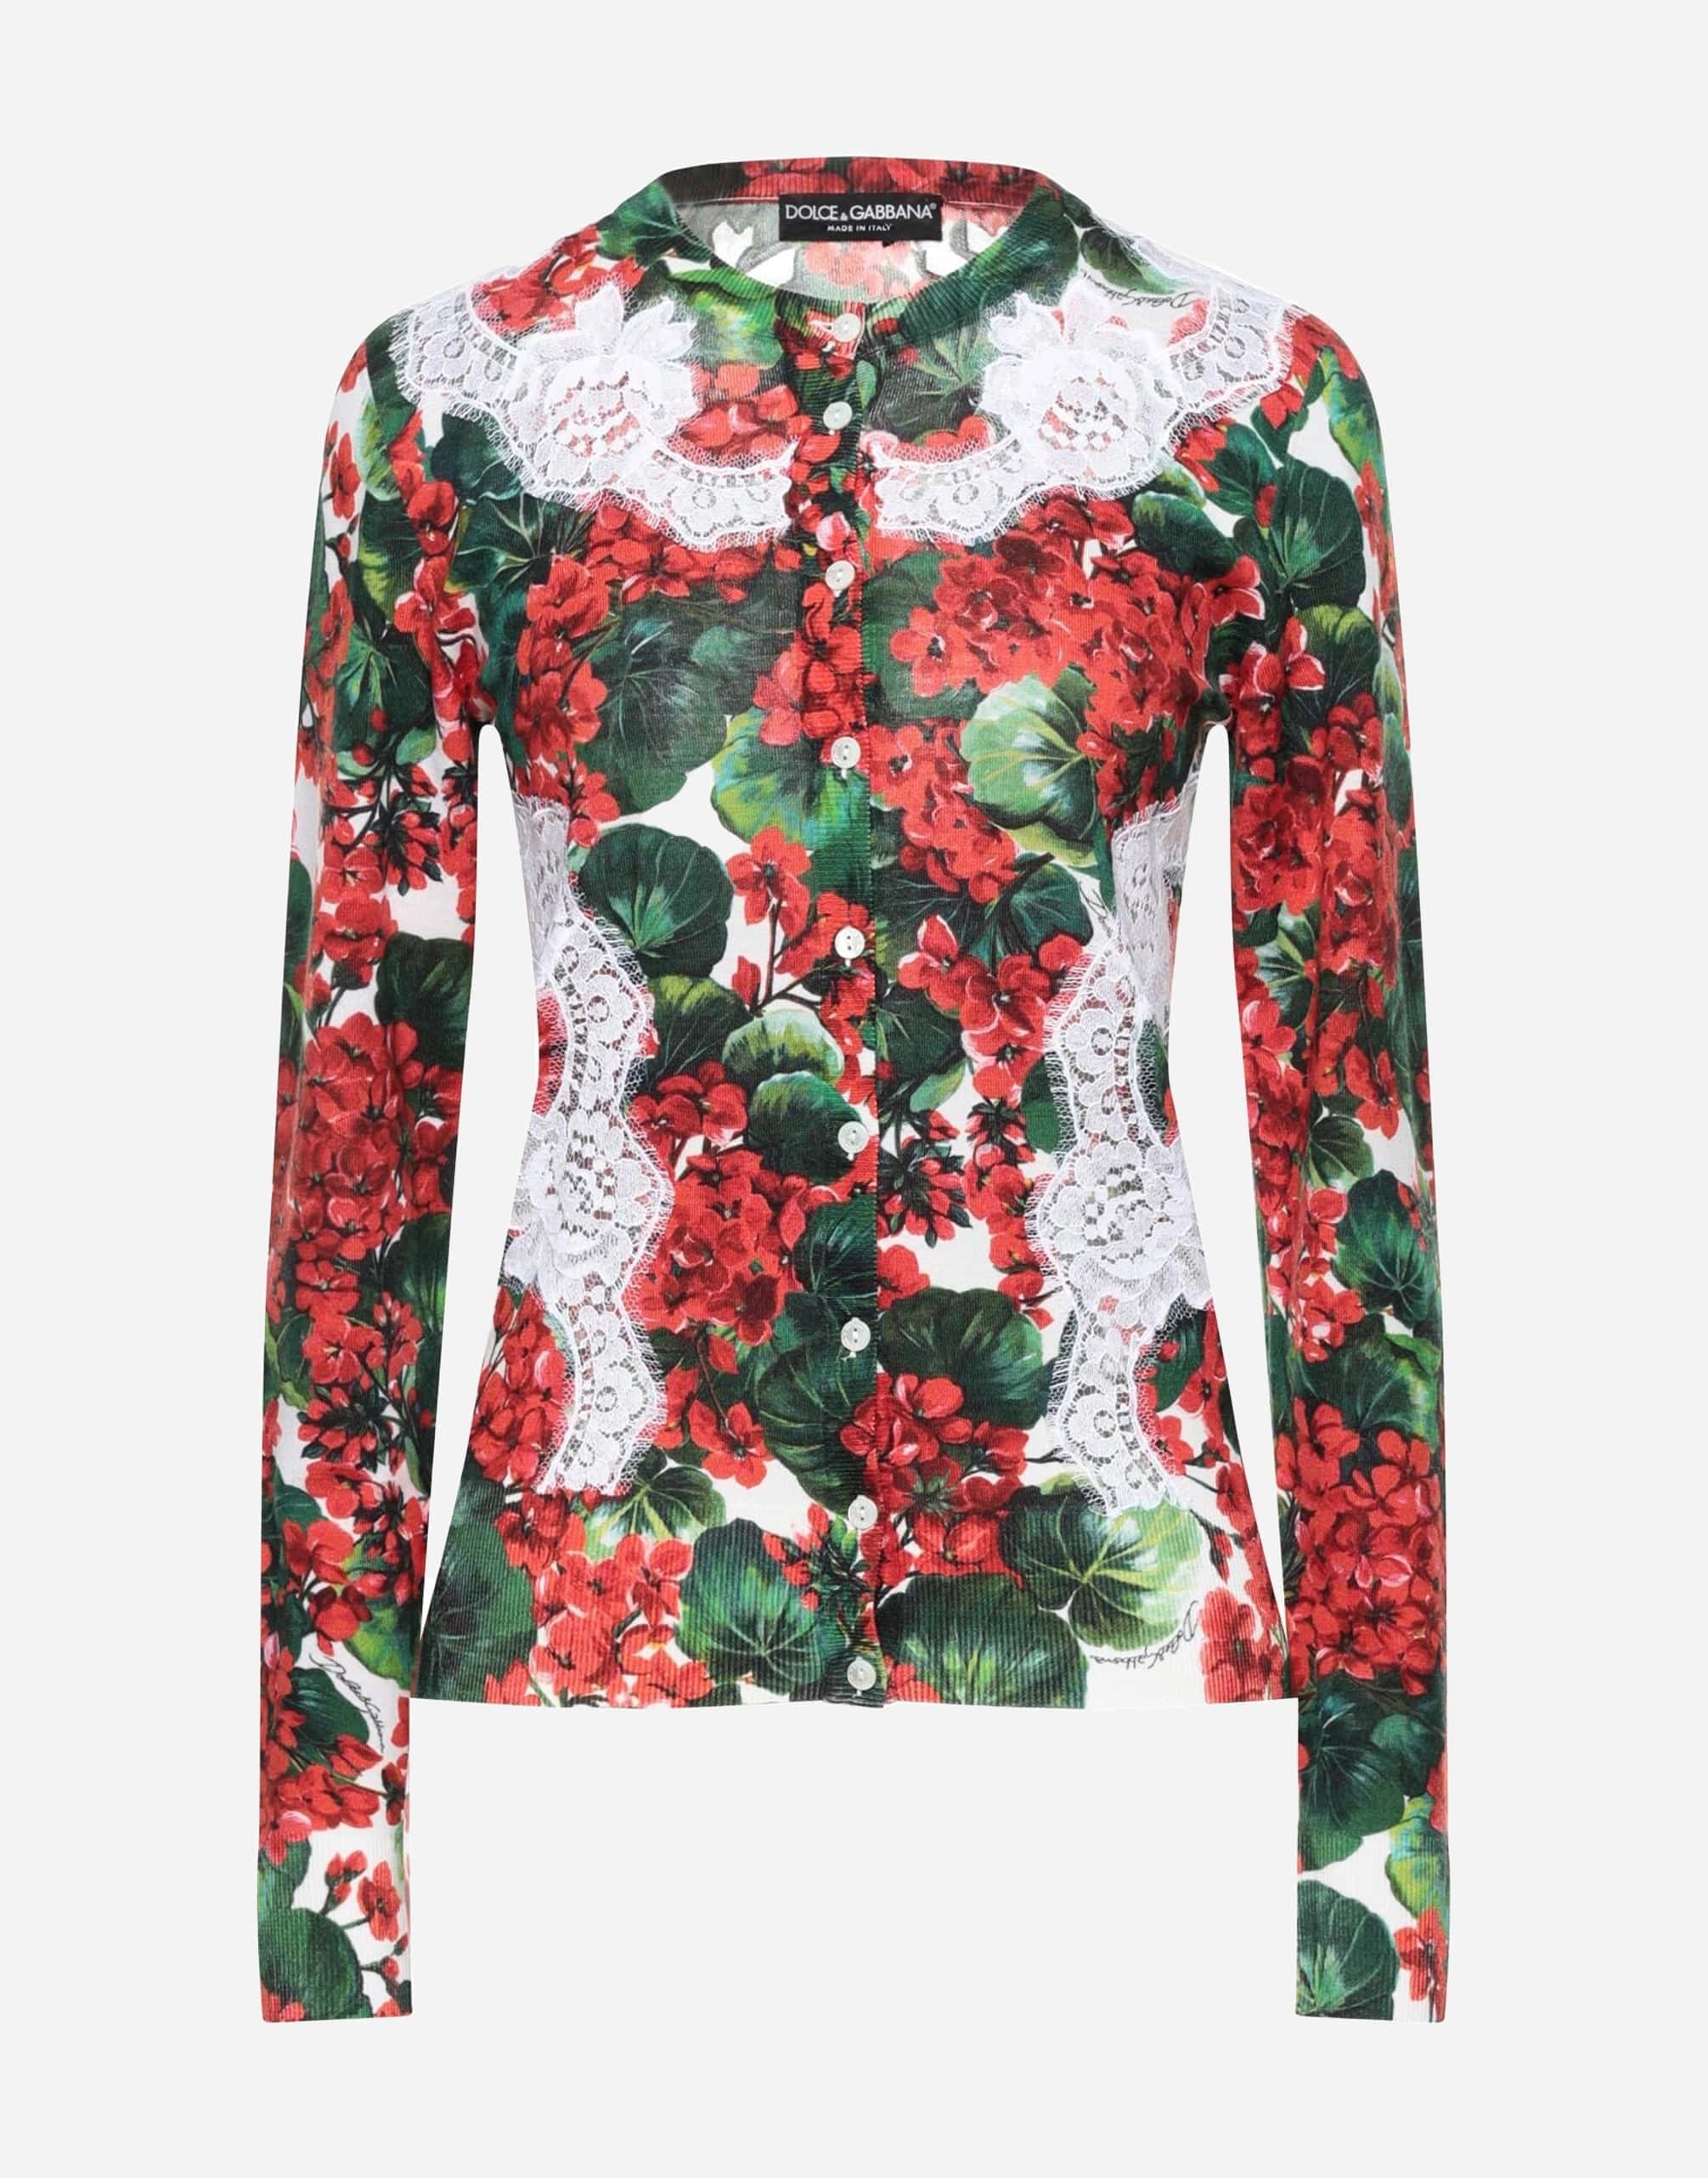 Dolce & Gabbana Floral Lace Button-Up Cardigan